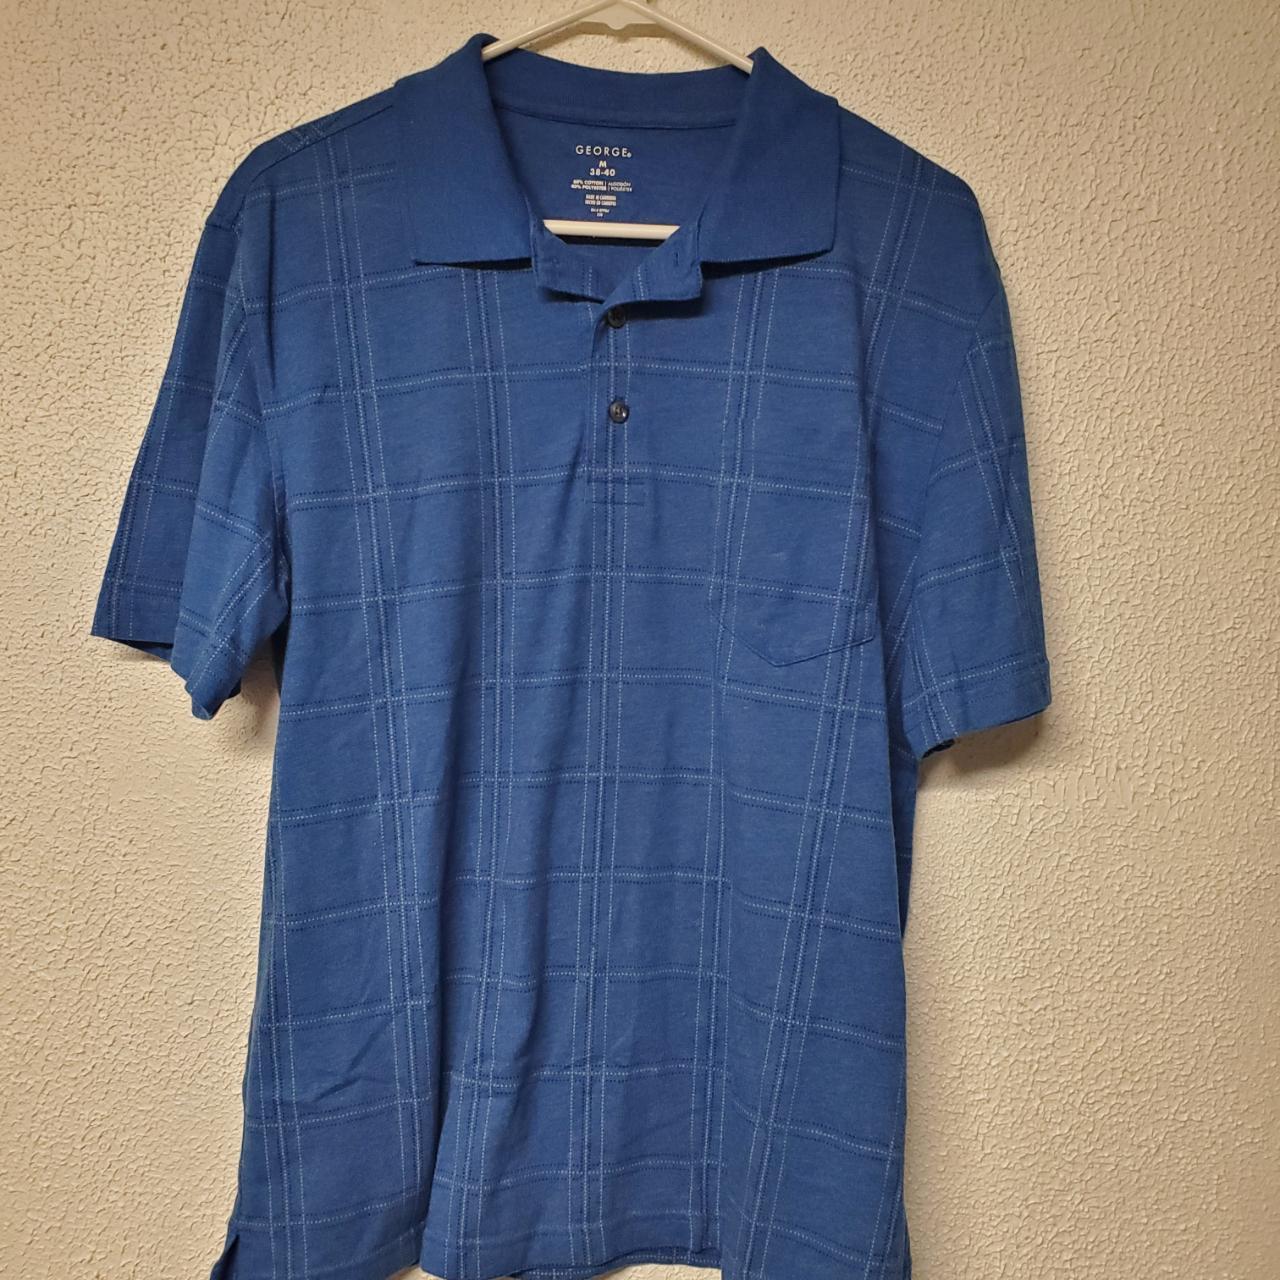 This blue George polo shirt is perfect for any... - Depop